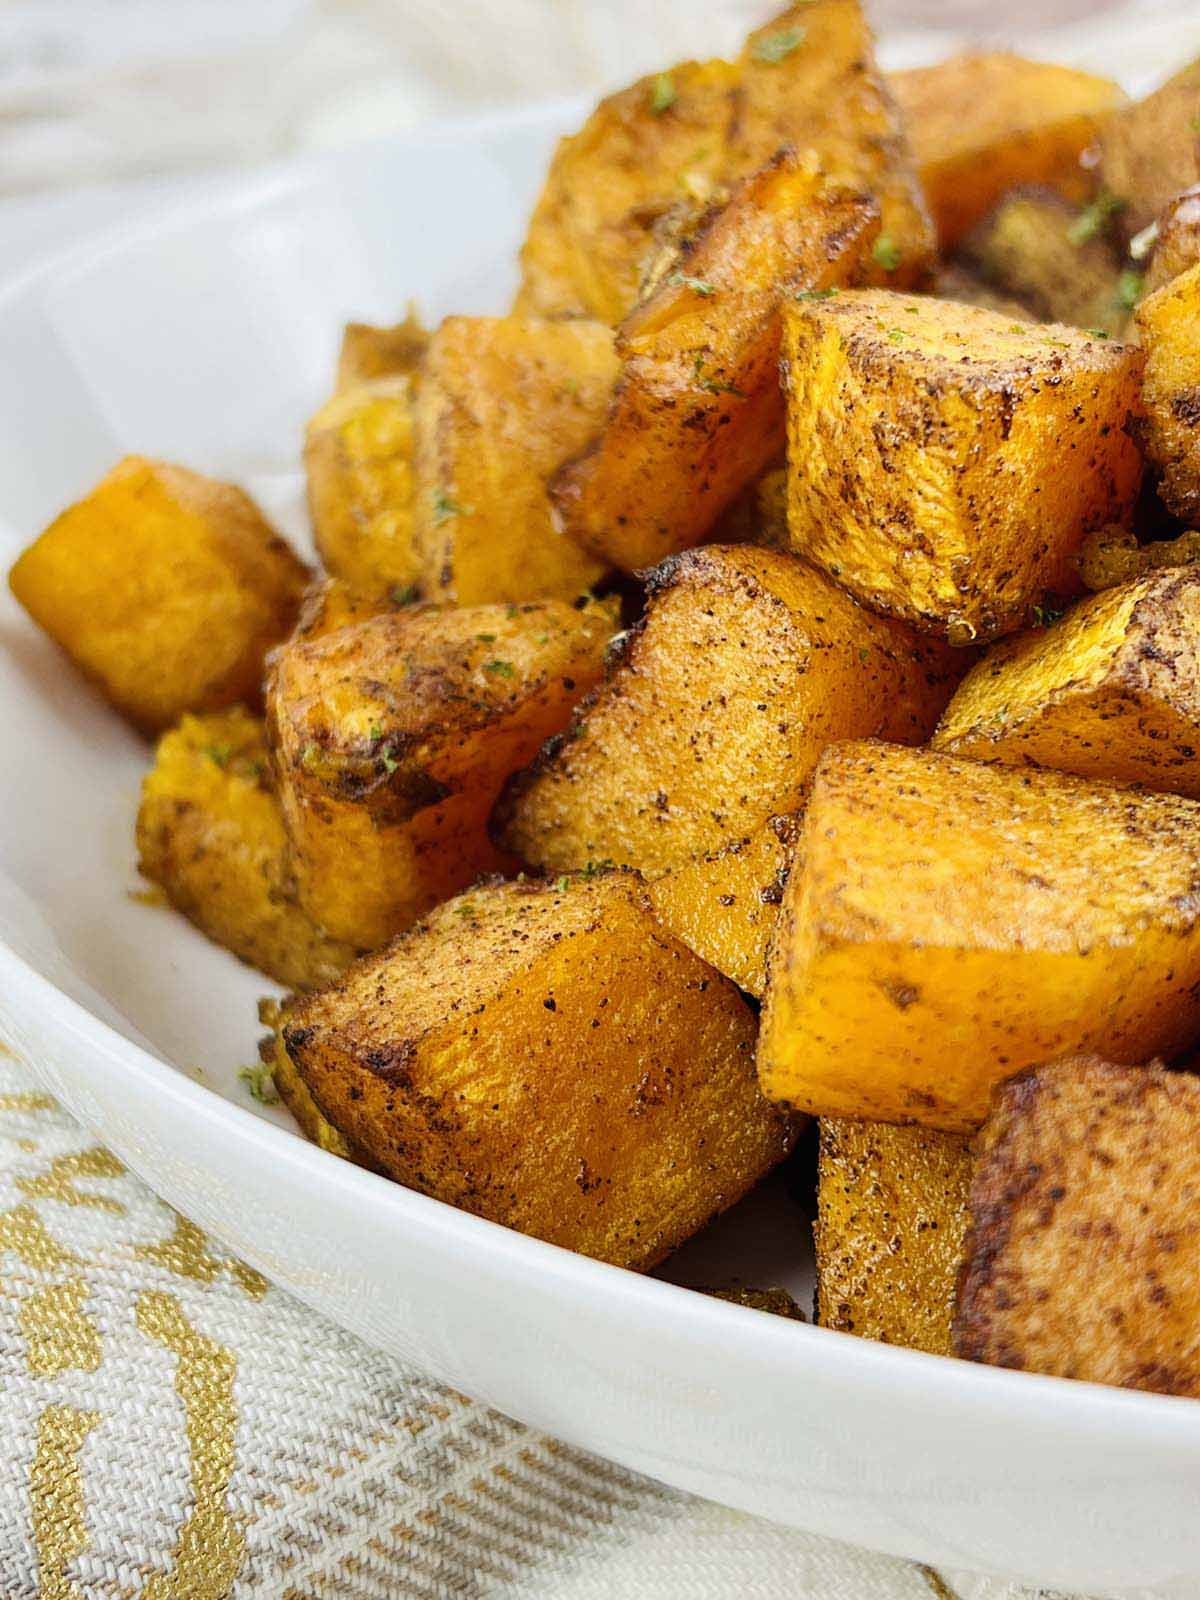 Cubed squash in a white bowl.